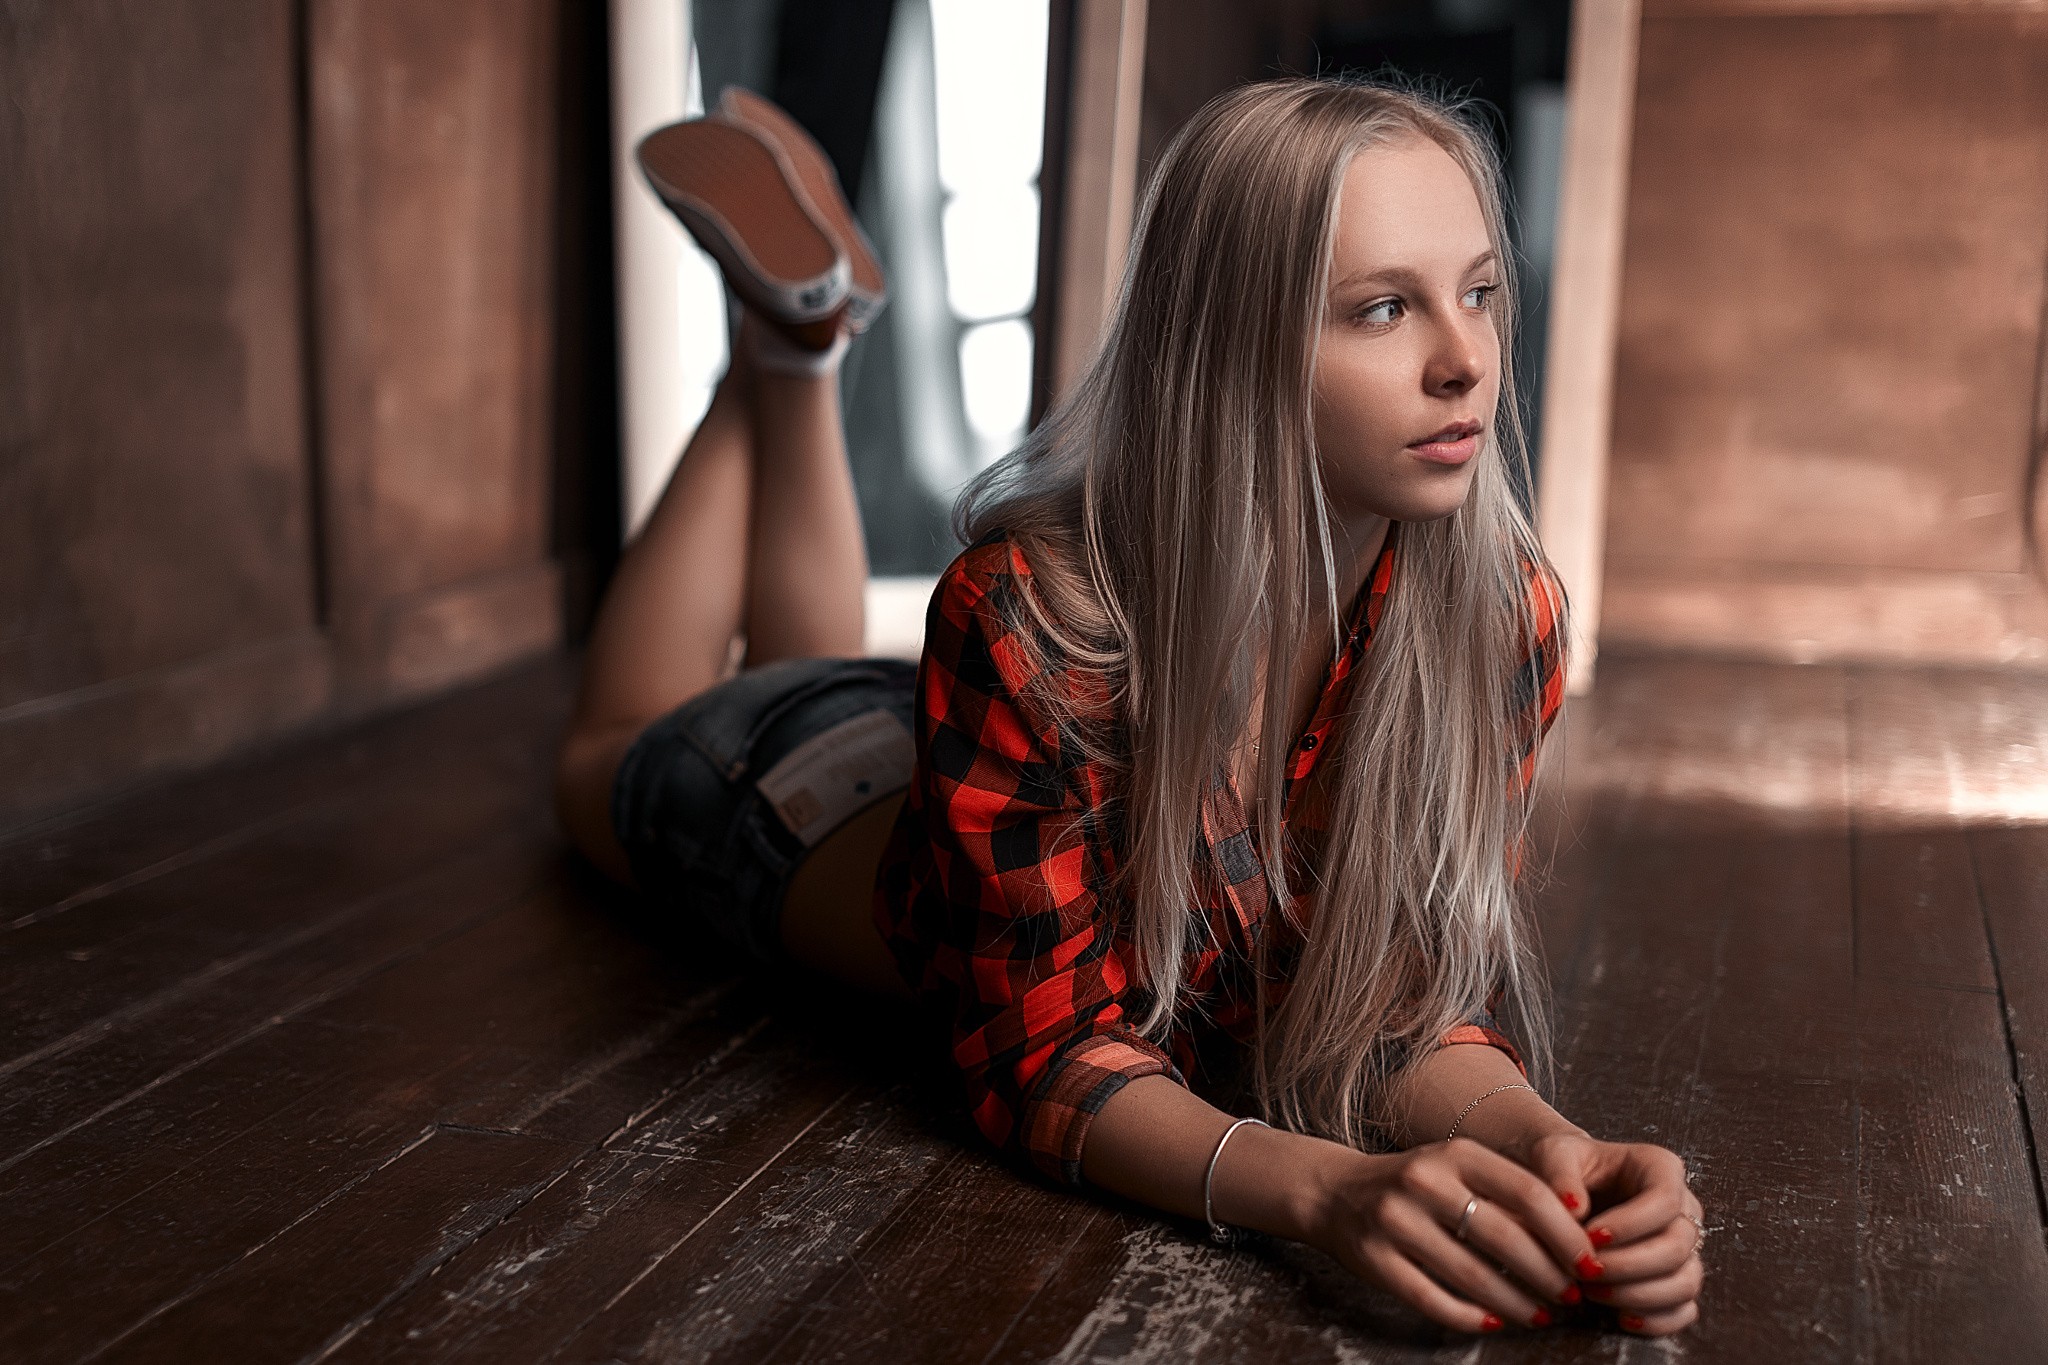 People 2048x1365 women blonde jean shorts on the floor wooden surface looking away legs up Stepan Gladkov women indoors indoors plaid shirt plaid clothing long hair red nails painted nails lying on front model